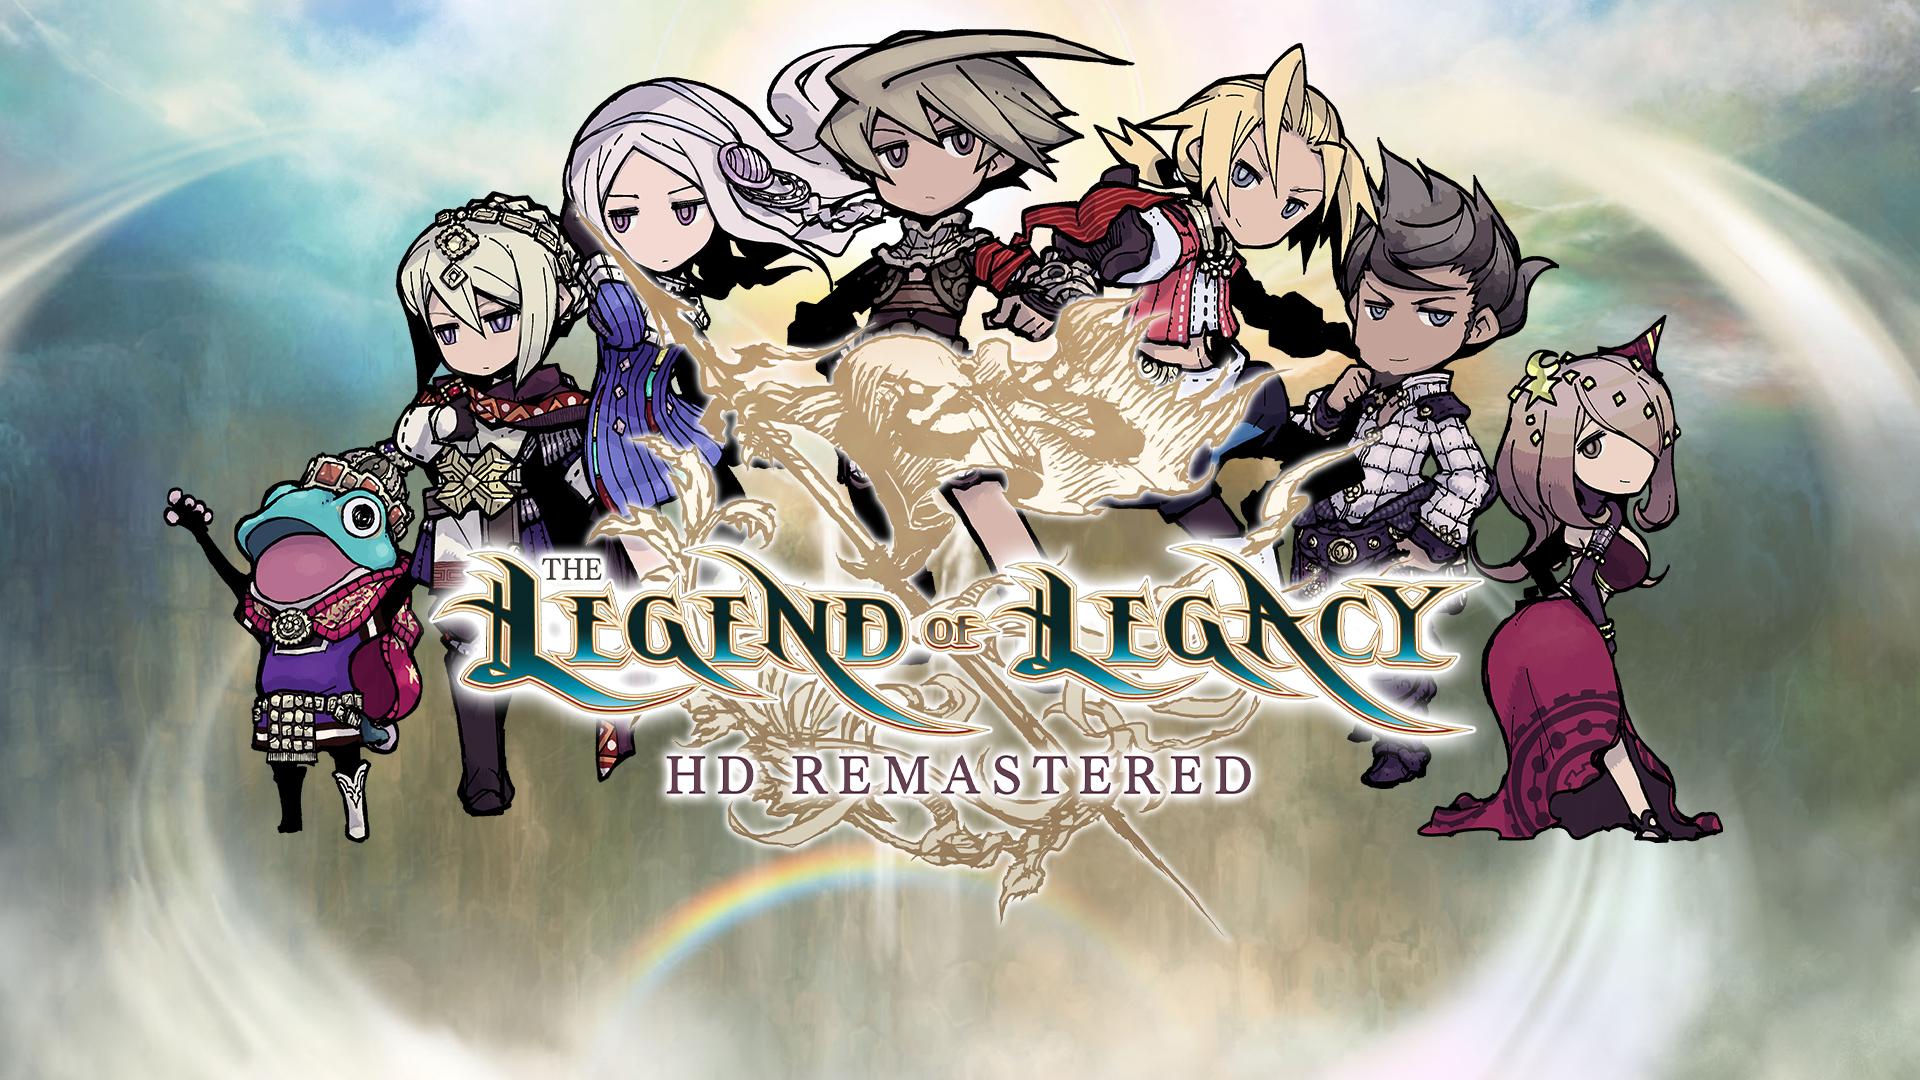 Jaquette de The Legend of Legacy HD Remastered